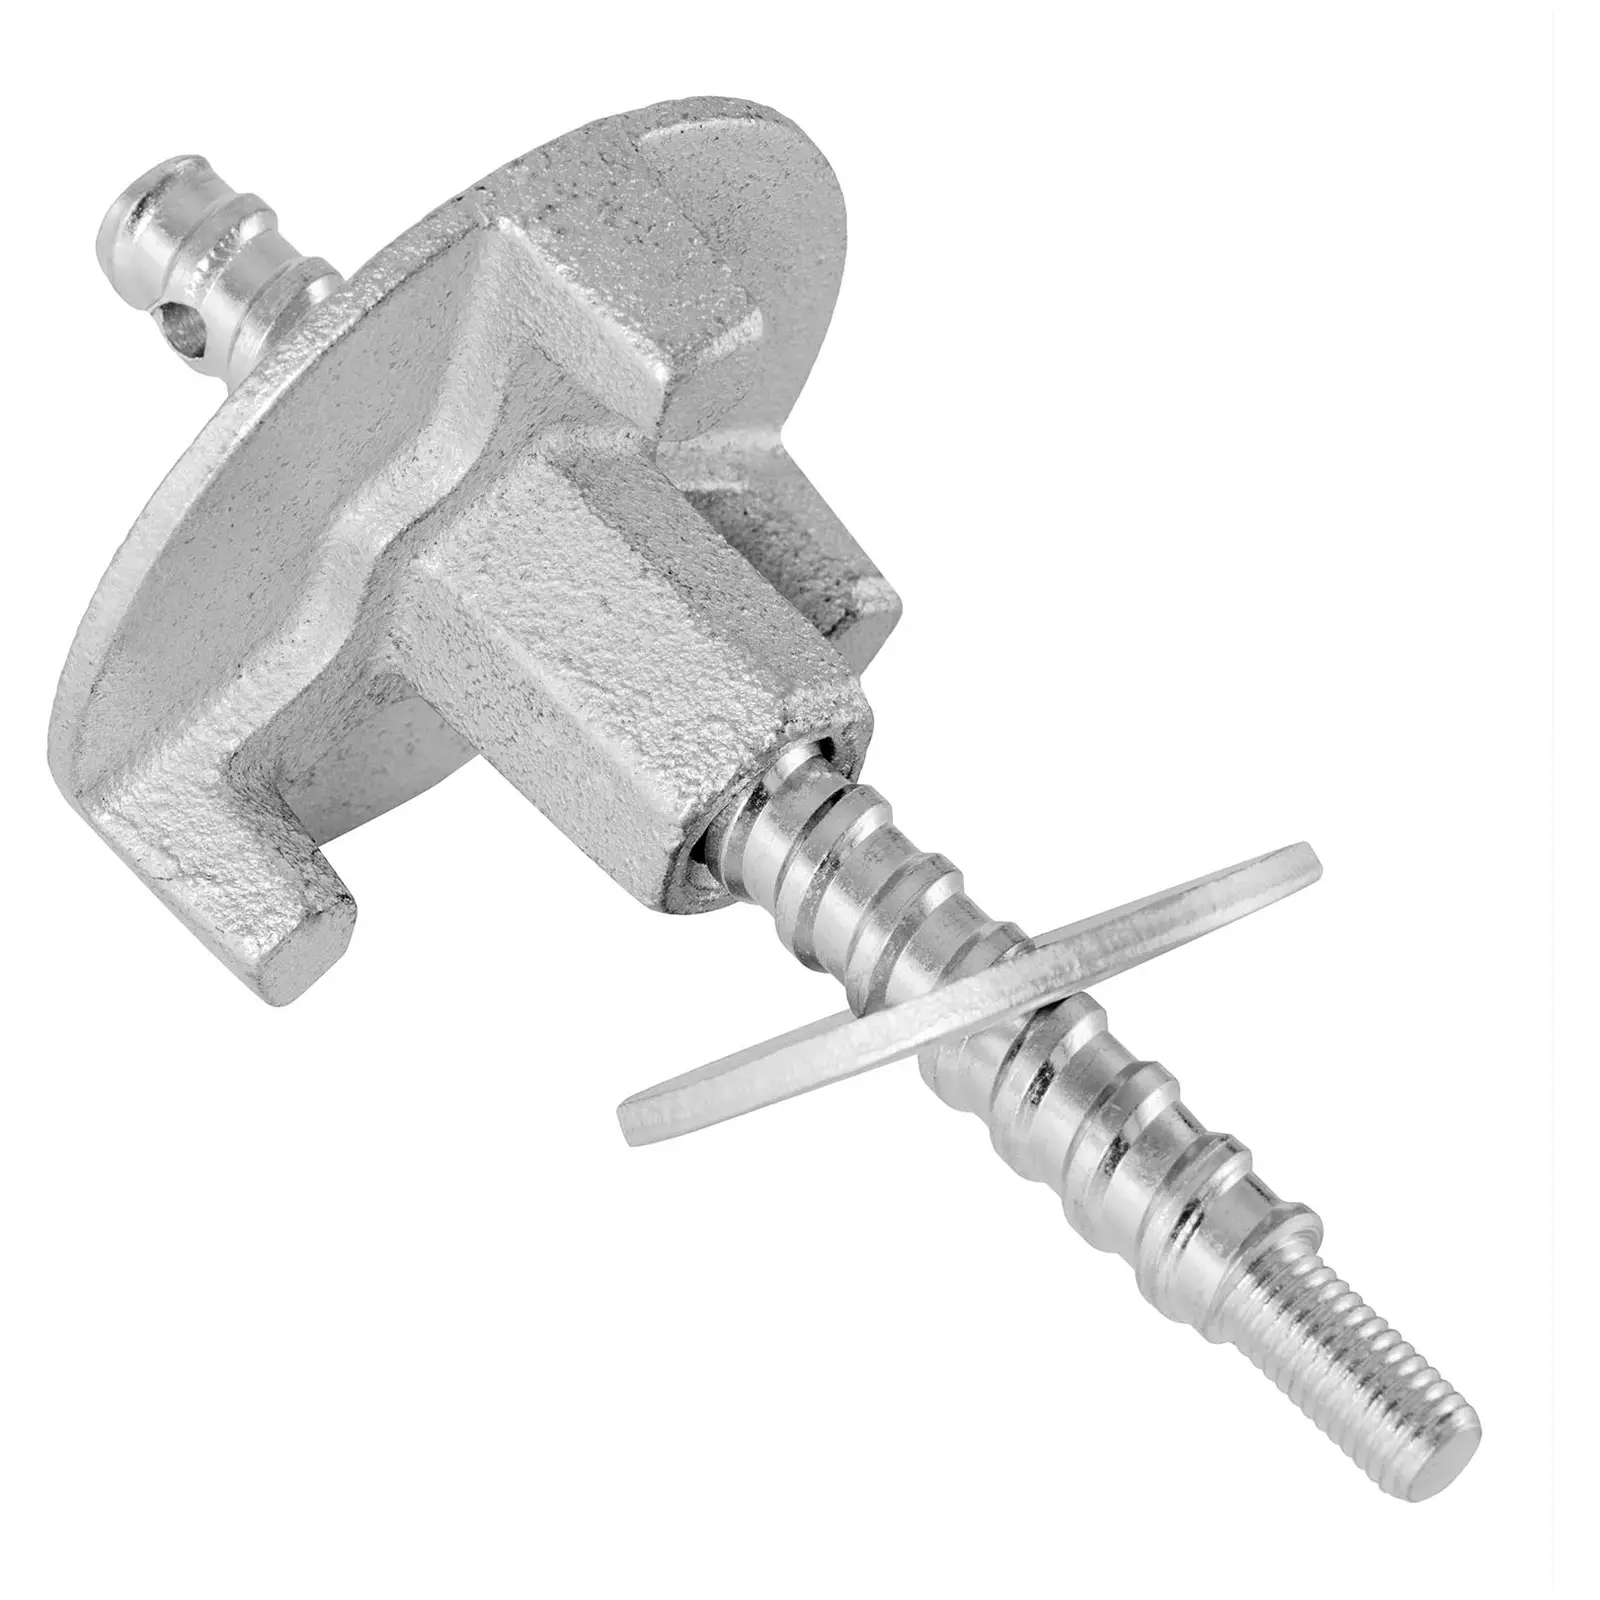 Drill Stand Anchor Kit - 17.5 cm - M12